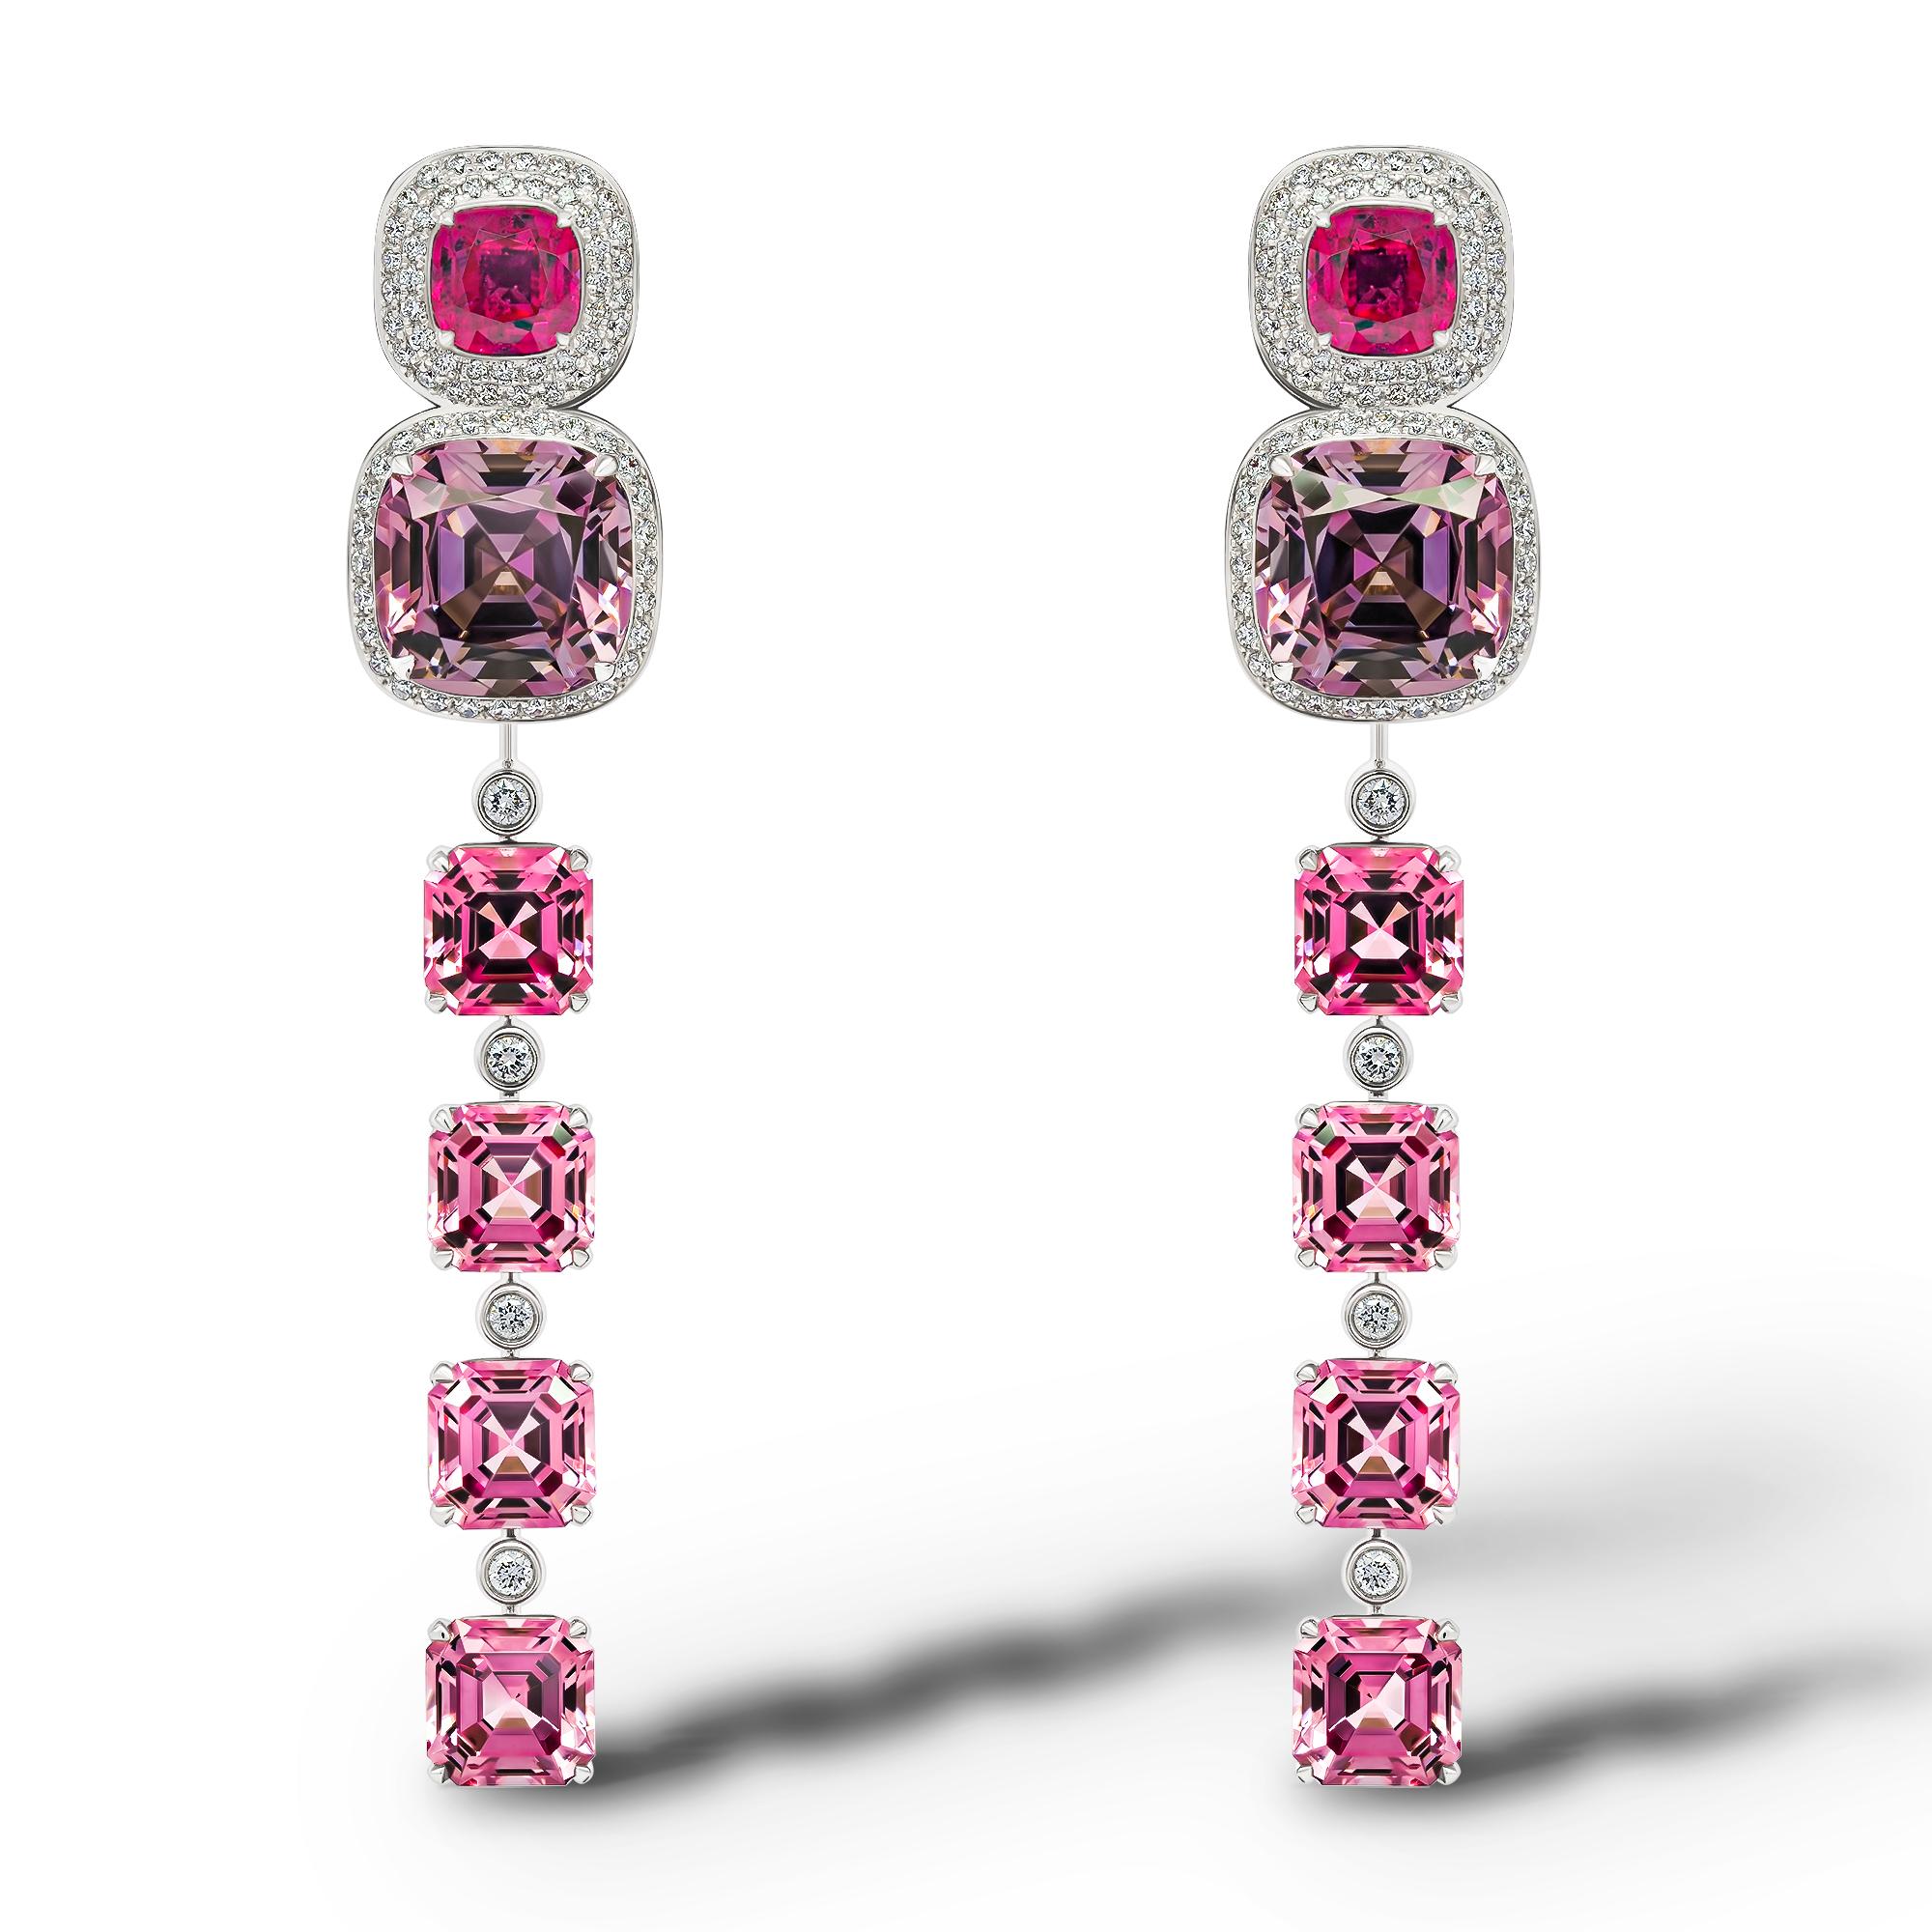 • 18k White Gold. 
• Unheated Rubies in Cushion cut – 2 pc total carat weight – 1.19.
• Spinels (Pink & Lavender) mixed cut – 10 pc total carat weight – 11.78.
• Diamonds in round cut 152 pc – total carat weight – 0.53. 
• Product Weight – 8.04